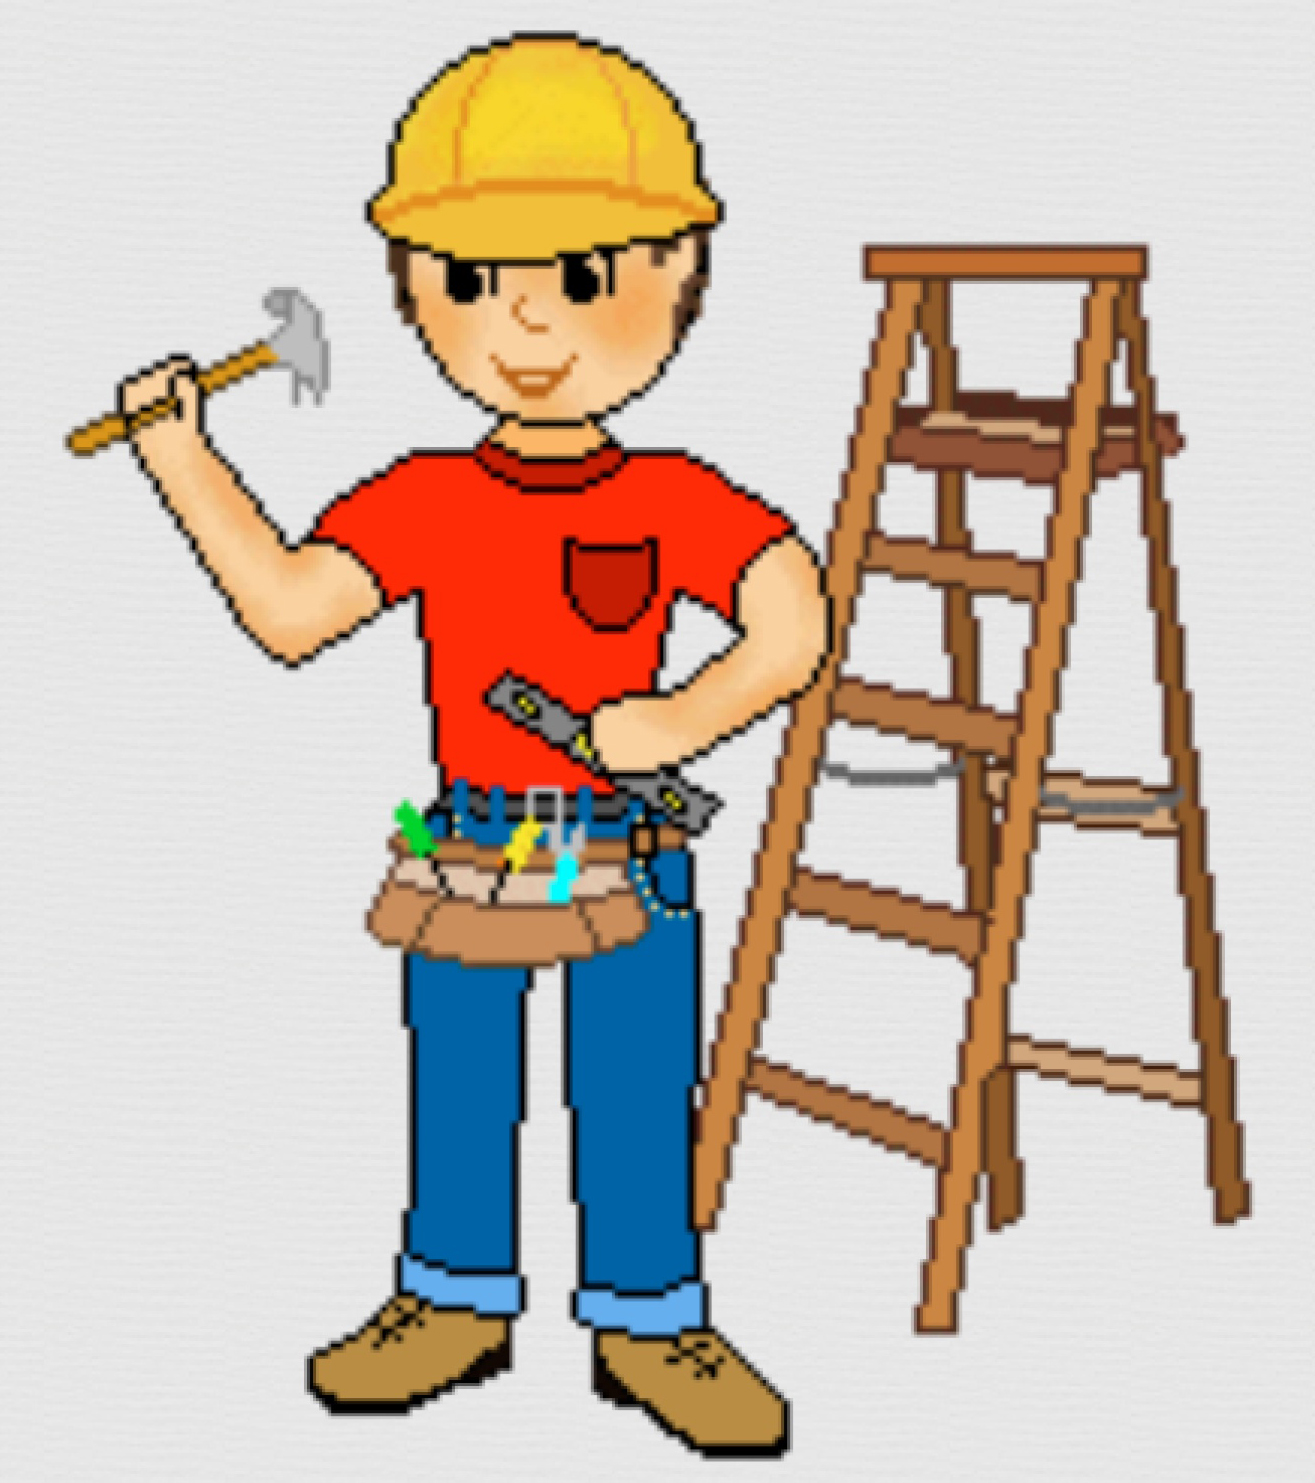 Art People Construction Worker   Clipart Panda   Free Clipart Images